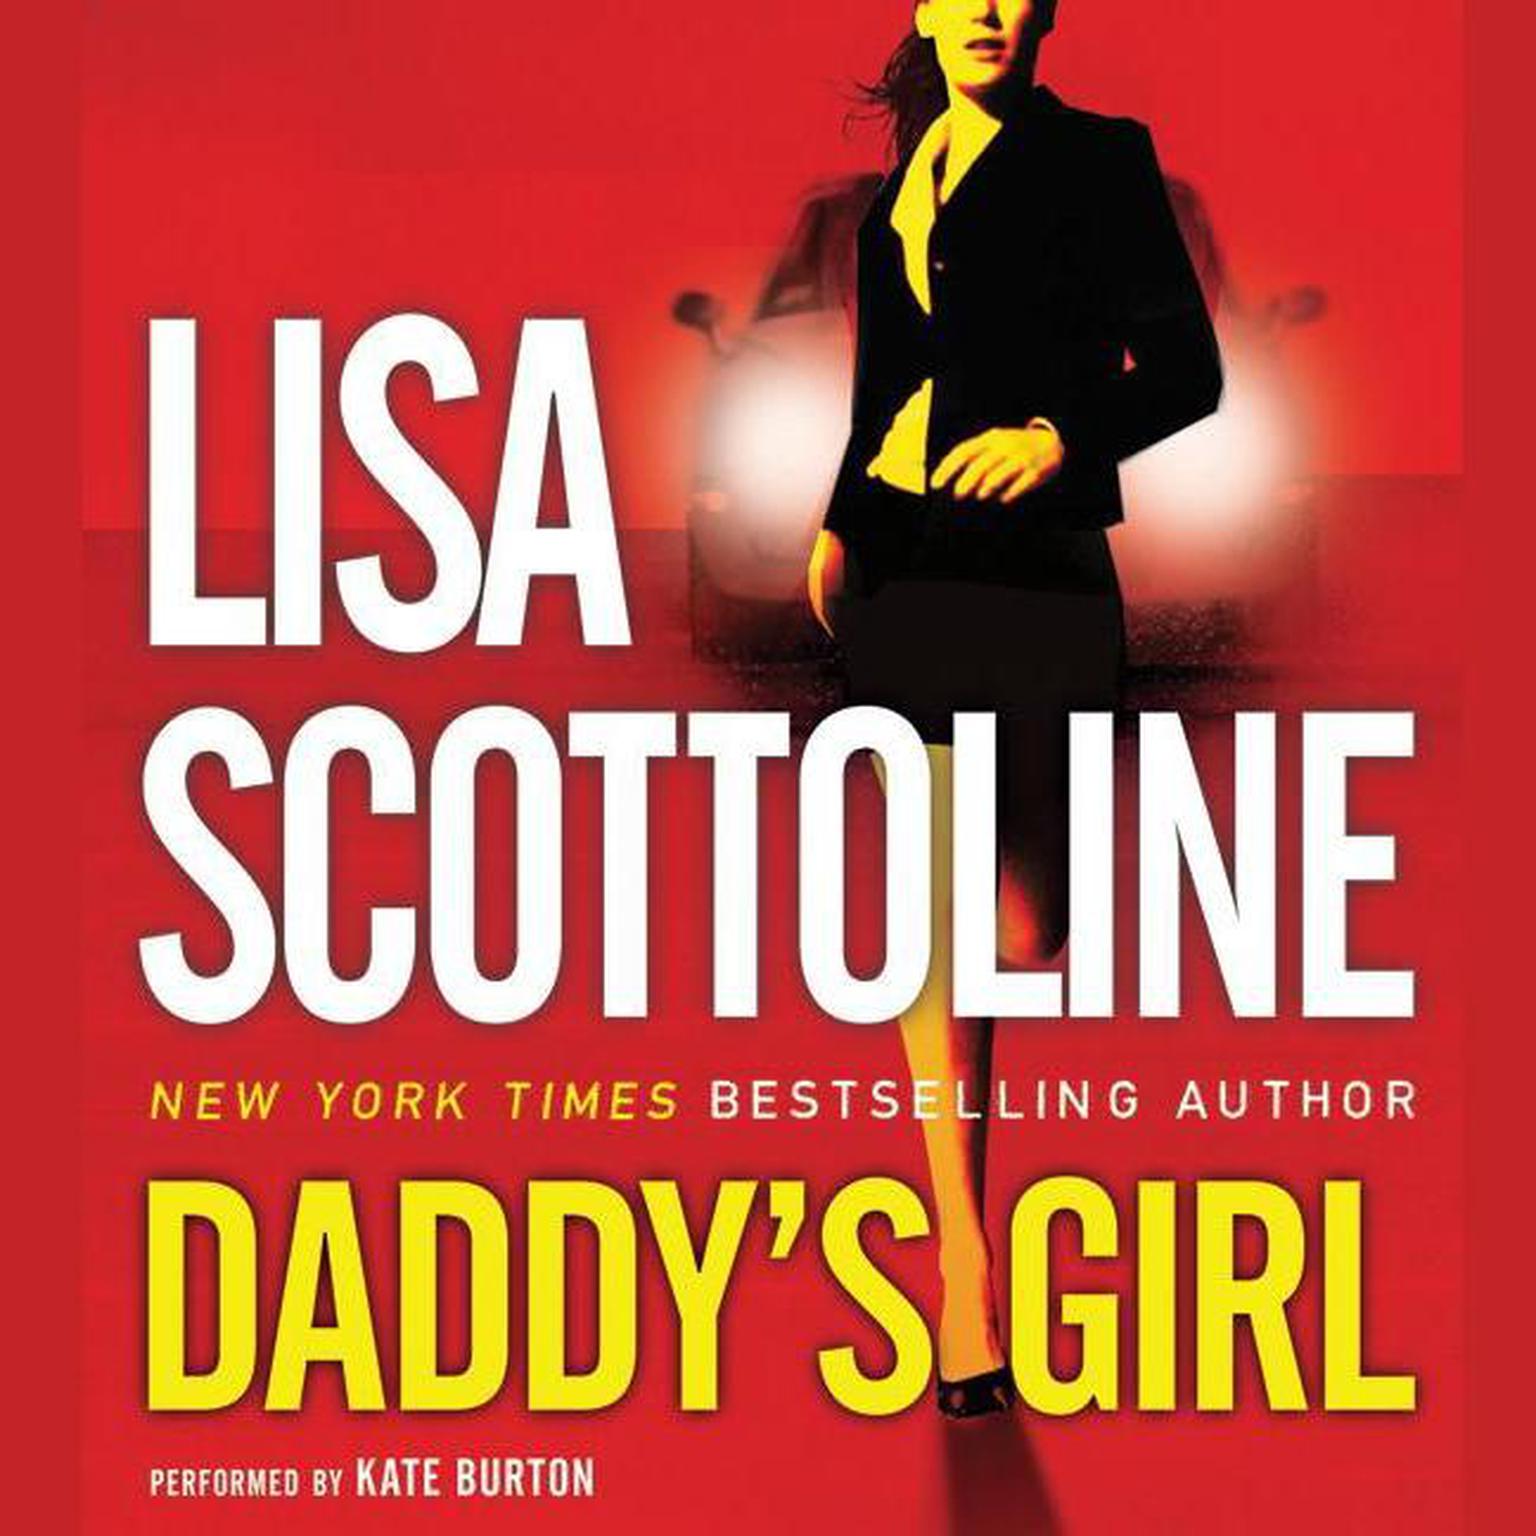 Daddys Girl (Abridged) Audiobook, by Lisa Scottoline